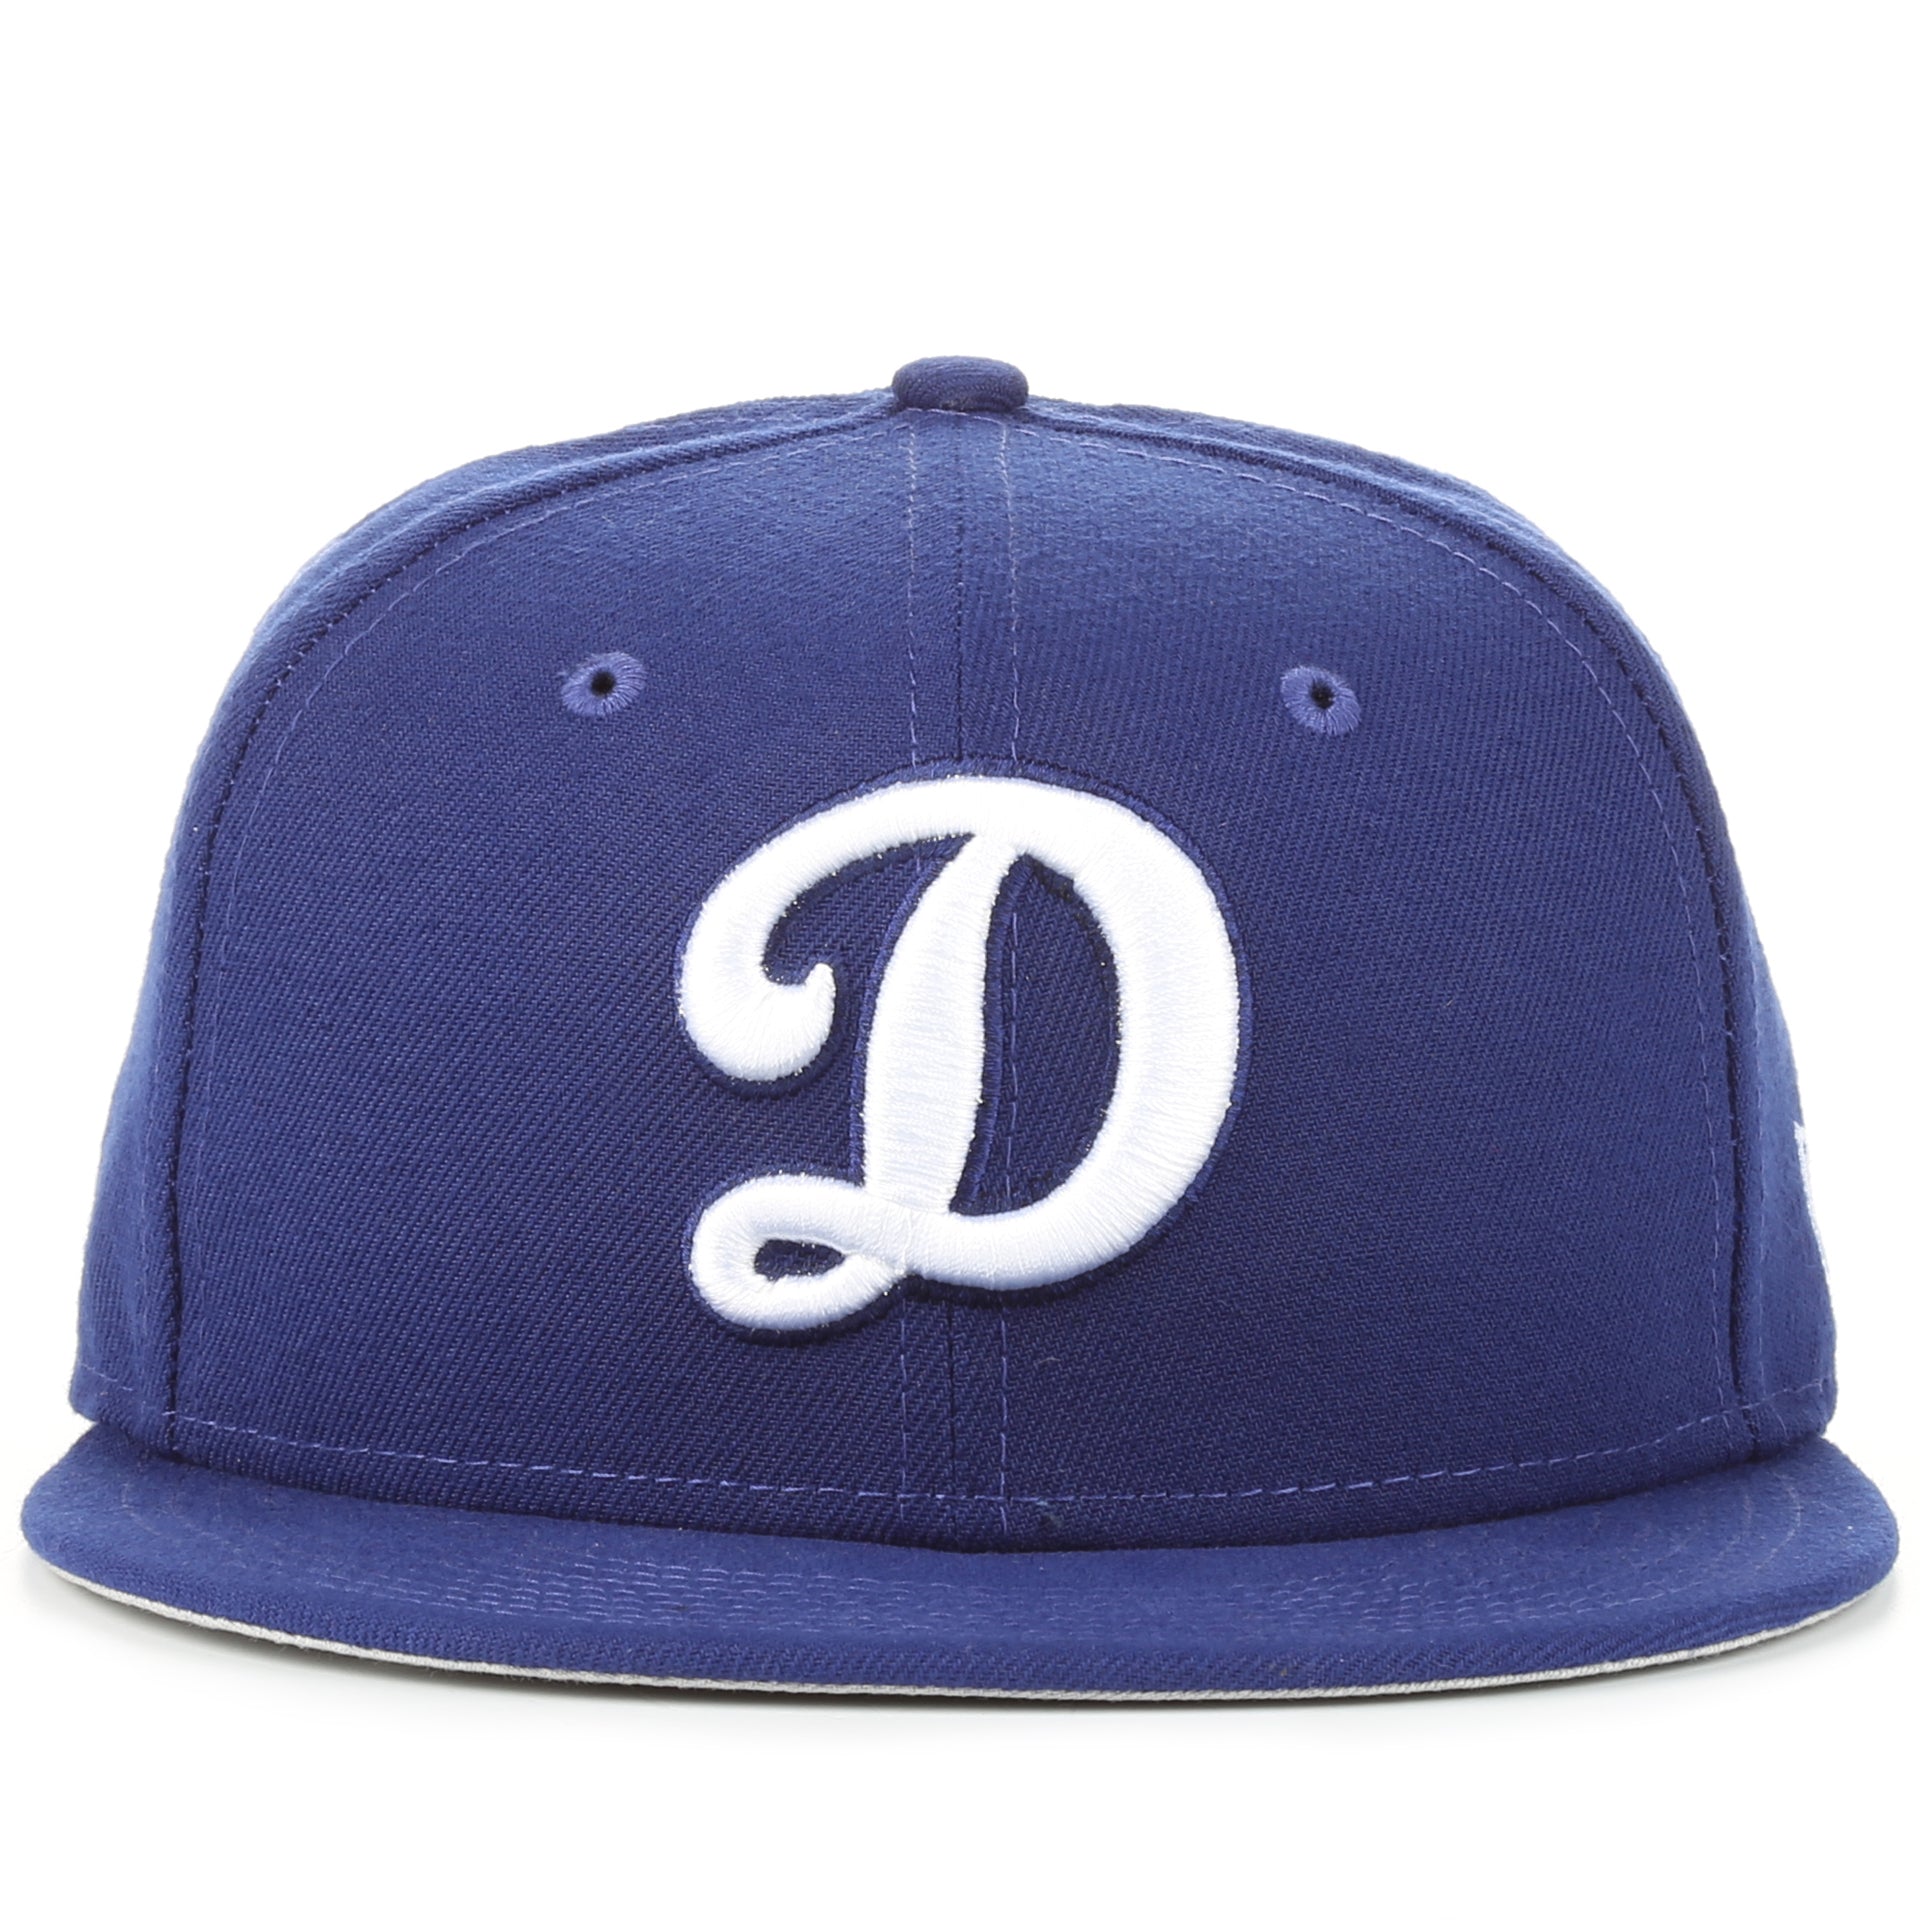 New Era 59Fifty MLB Basic Fitted Cap - Los Angeles Dodgers Dry D